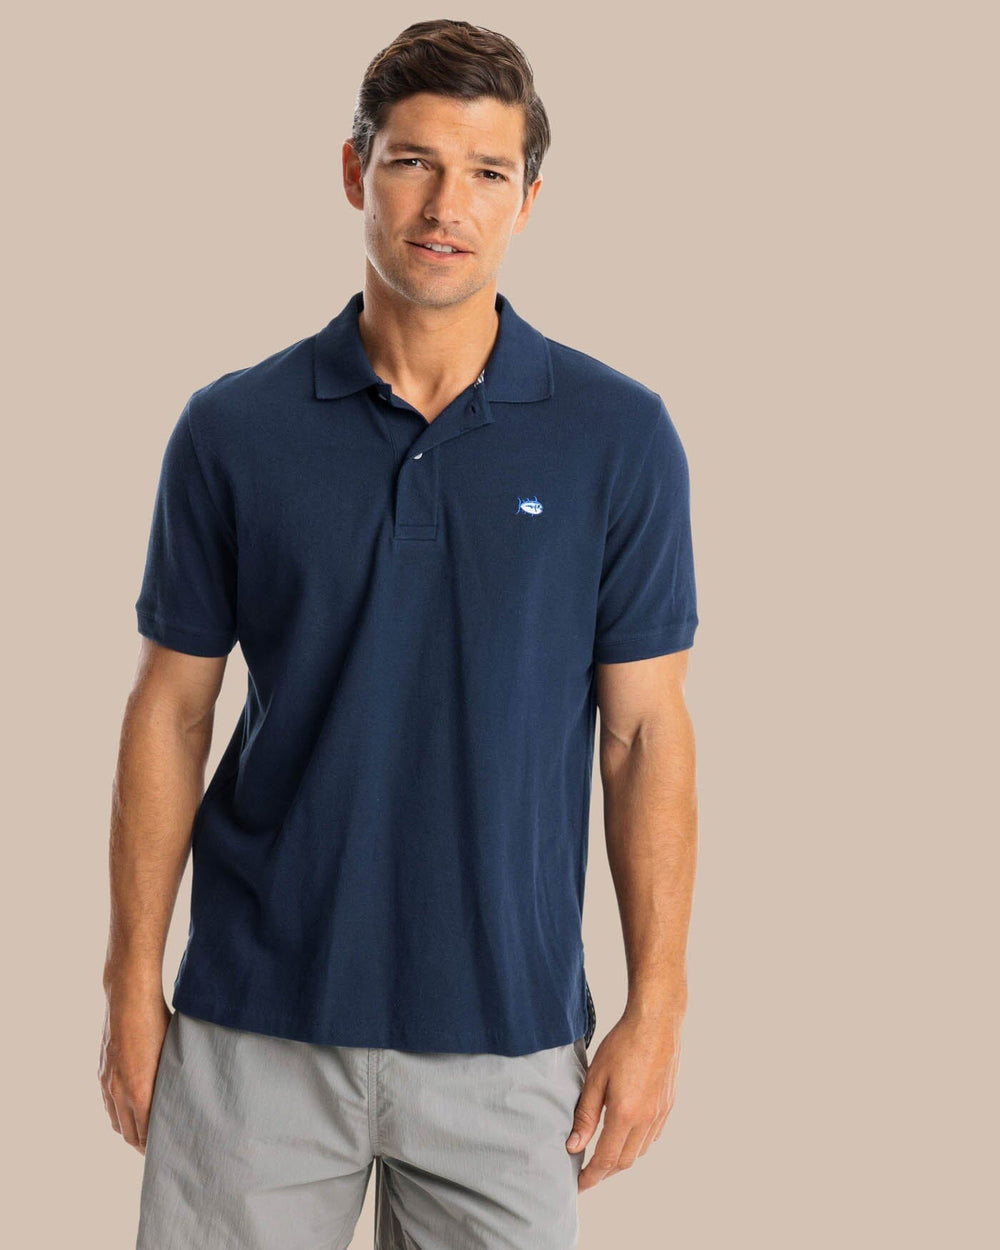 The front view of the Southern Tide new-skipjack-polo-shirt by Southern Tide - True Navy